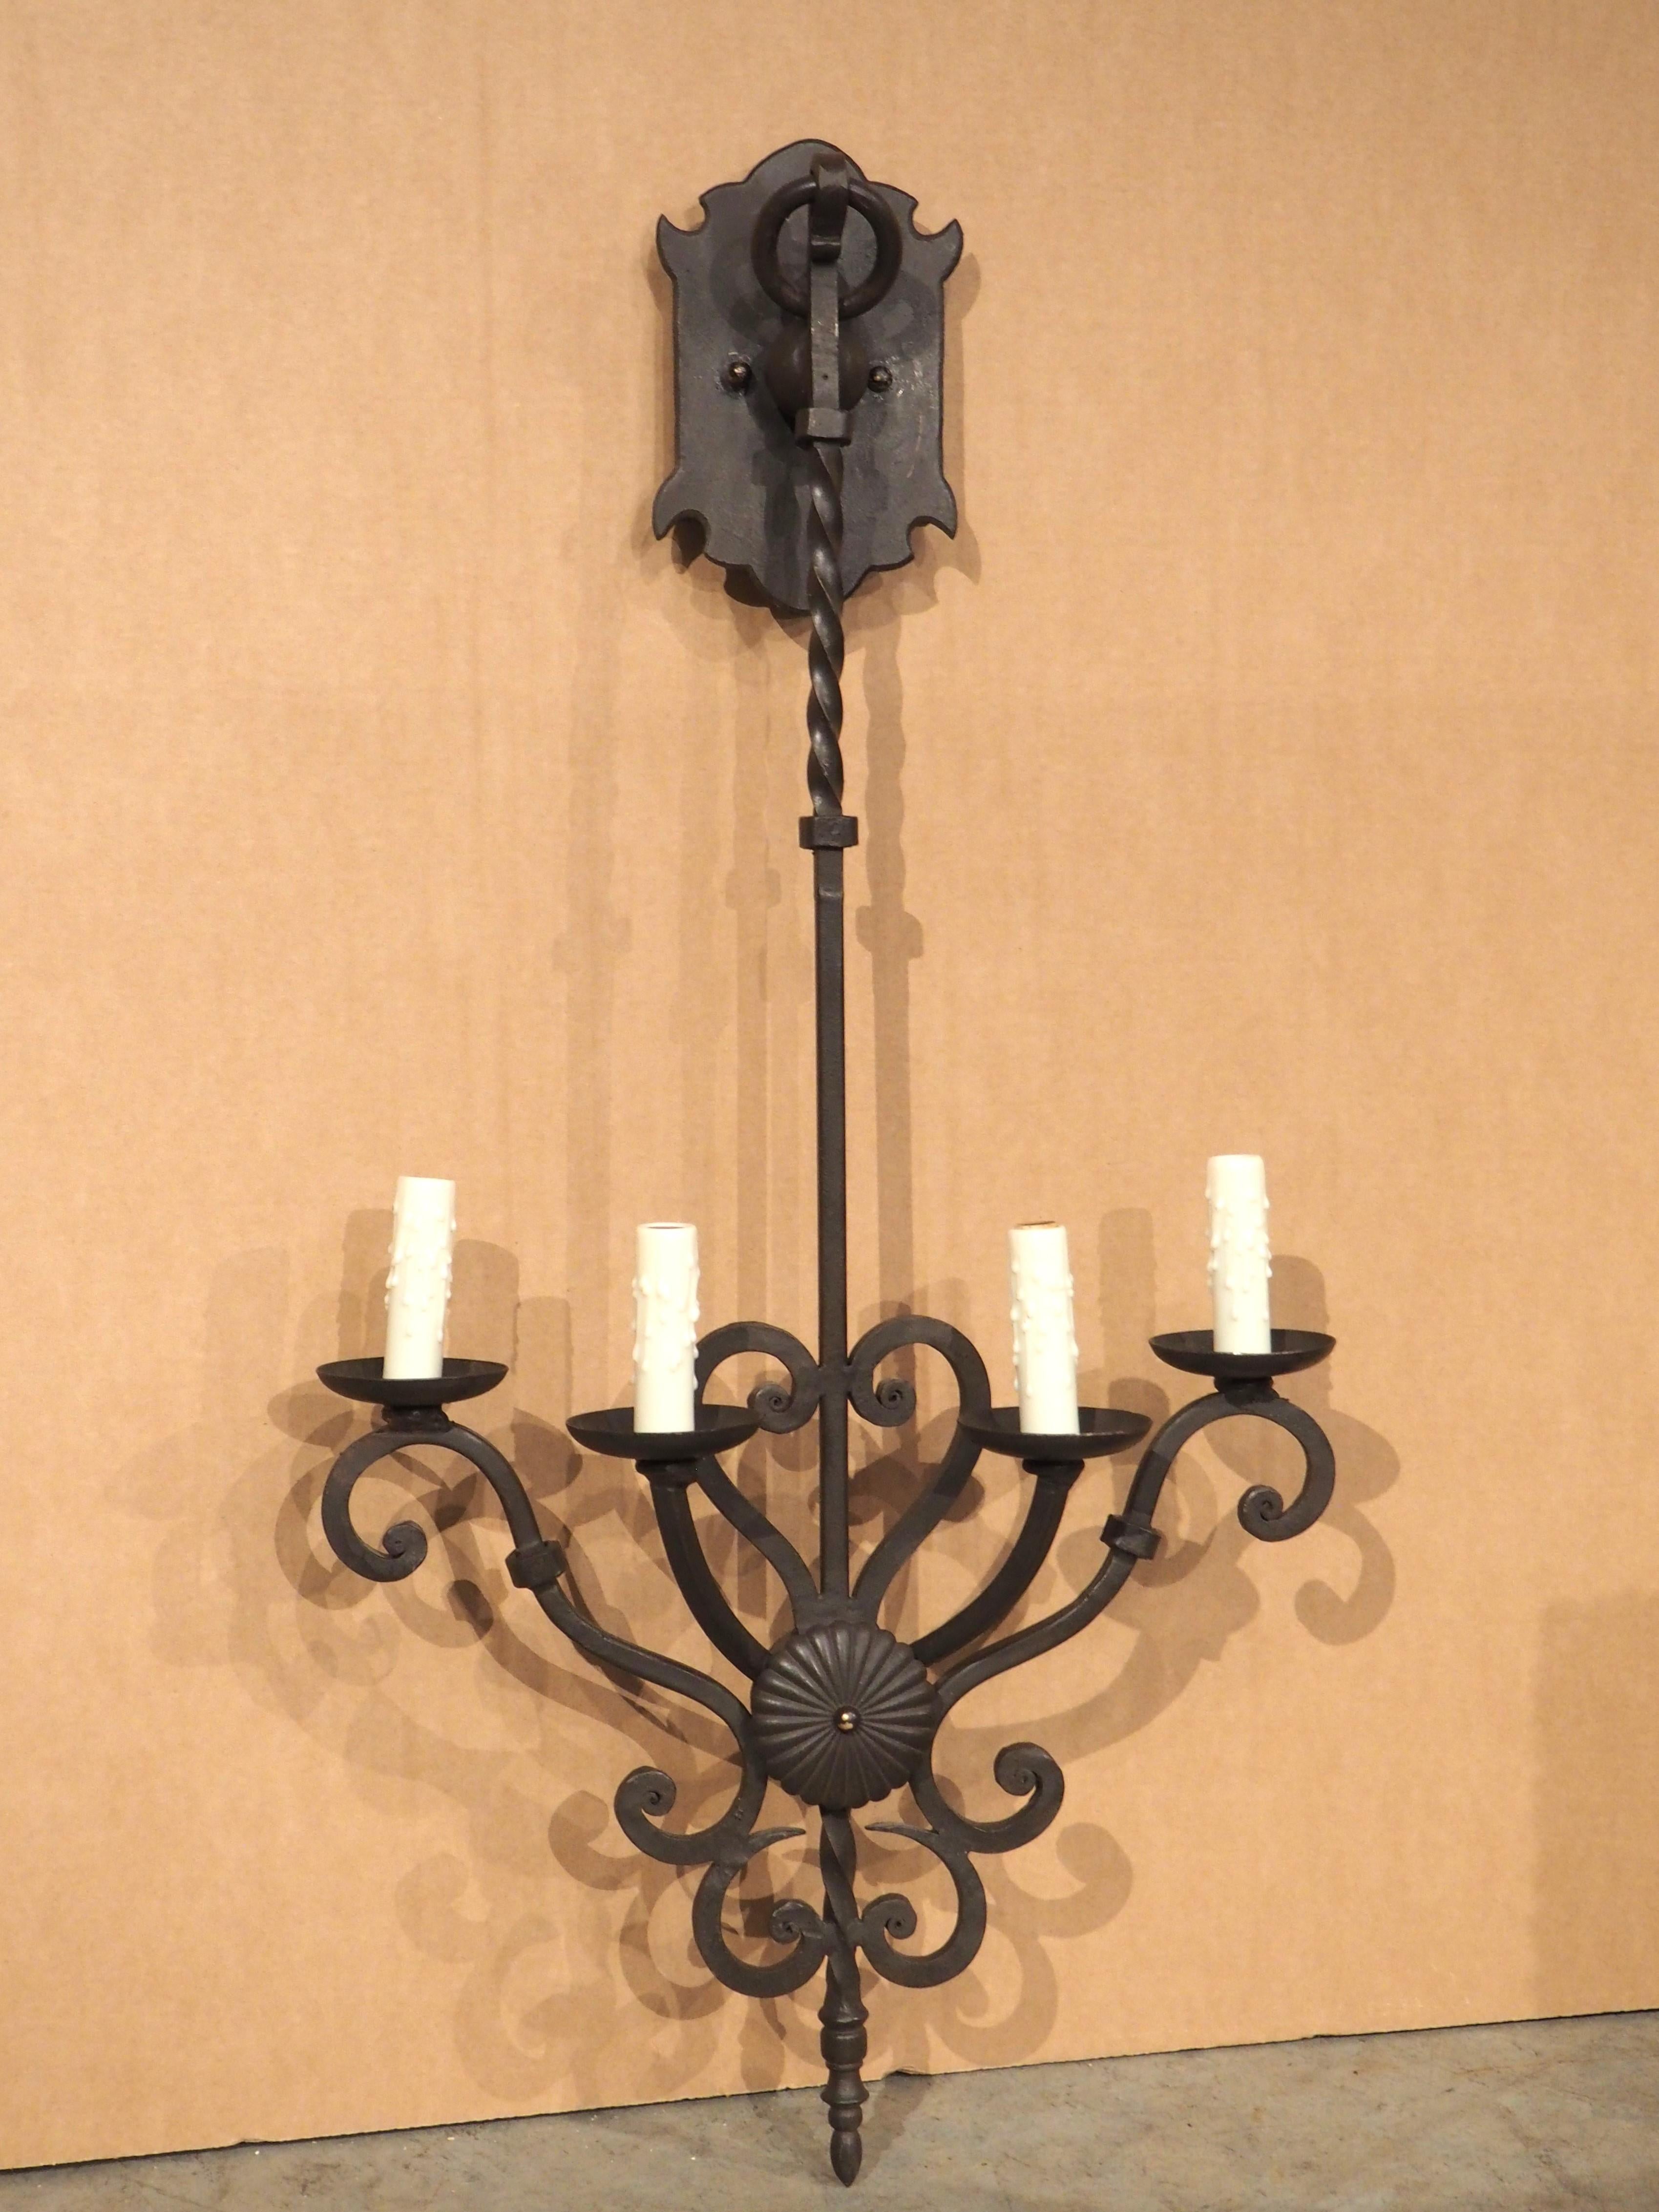 This four-arm wall sconce features a long twisted column that allows the lights to hang beneath the shaped backplate with a ring finial. The shaft is affixed to the backplate by a large roundel, just above a turned section. As the column extends